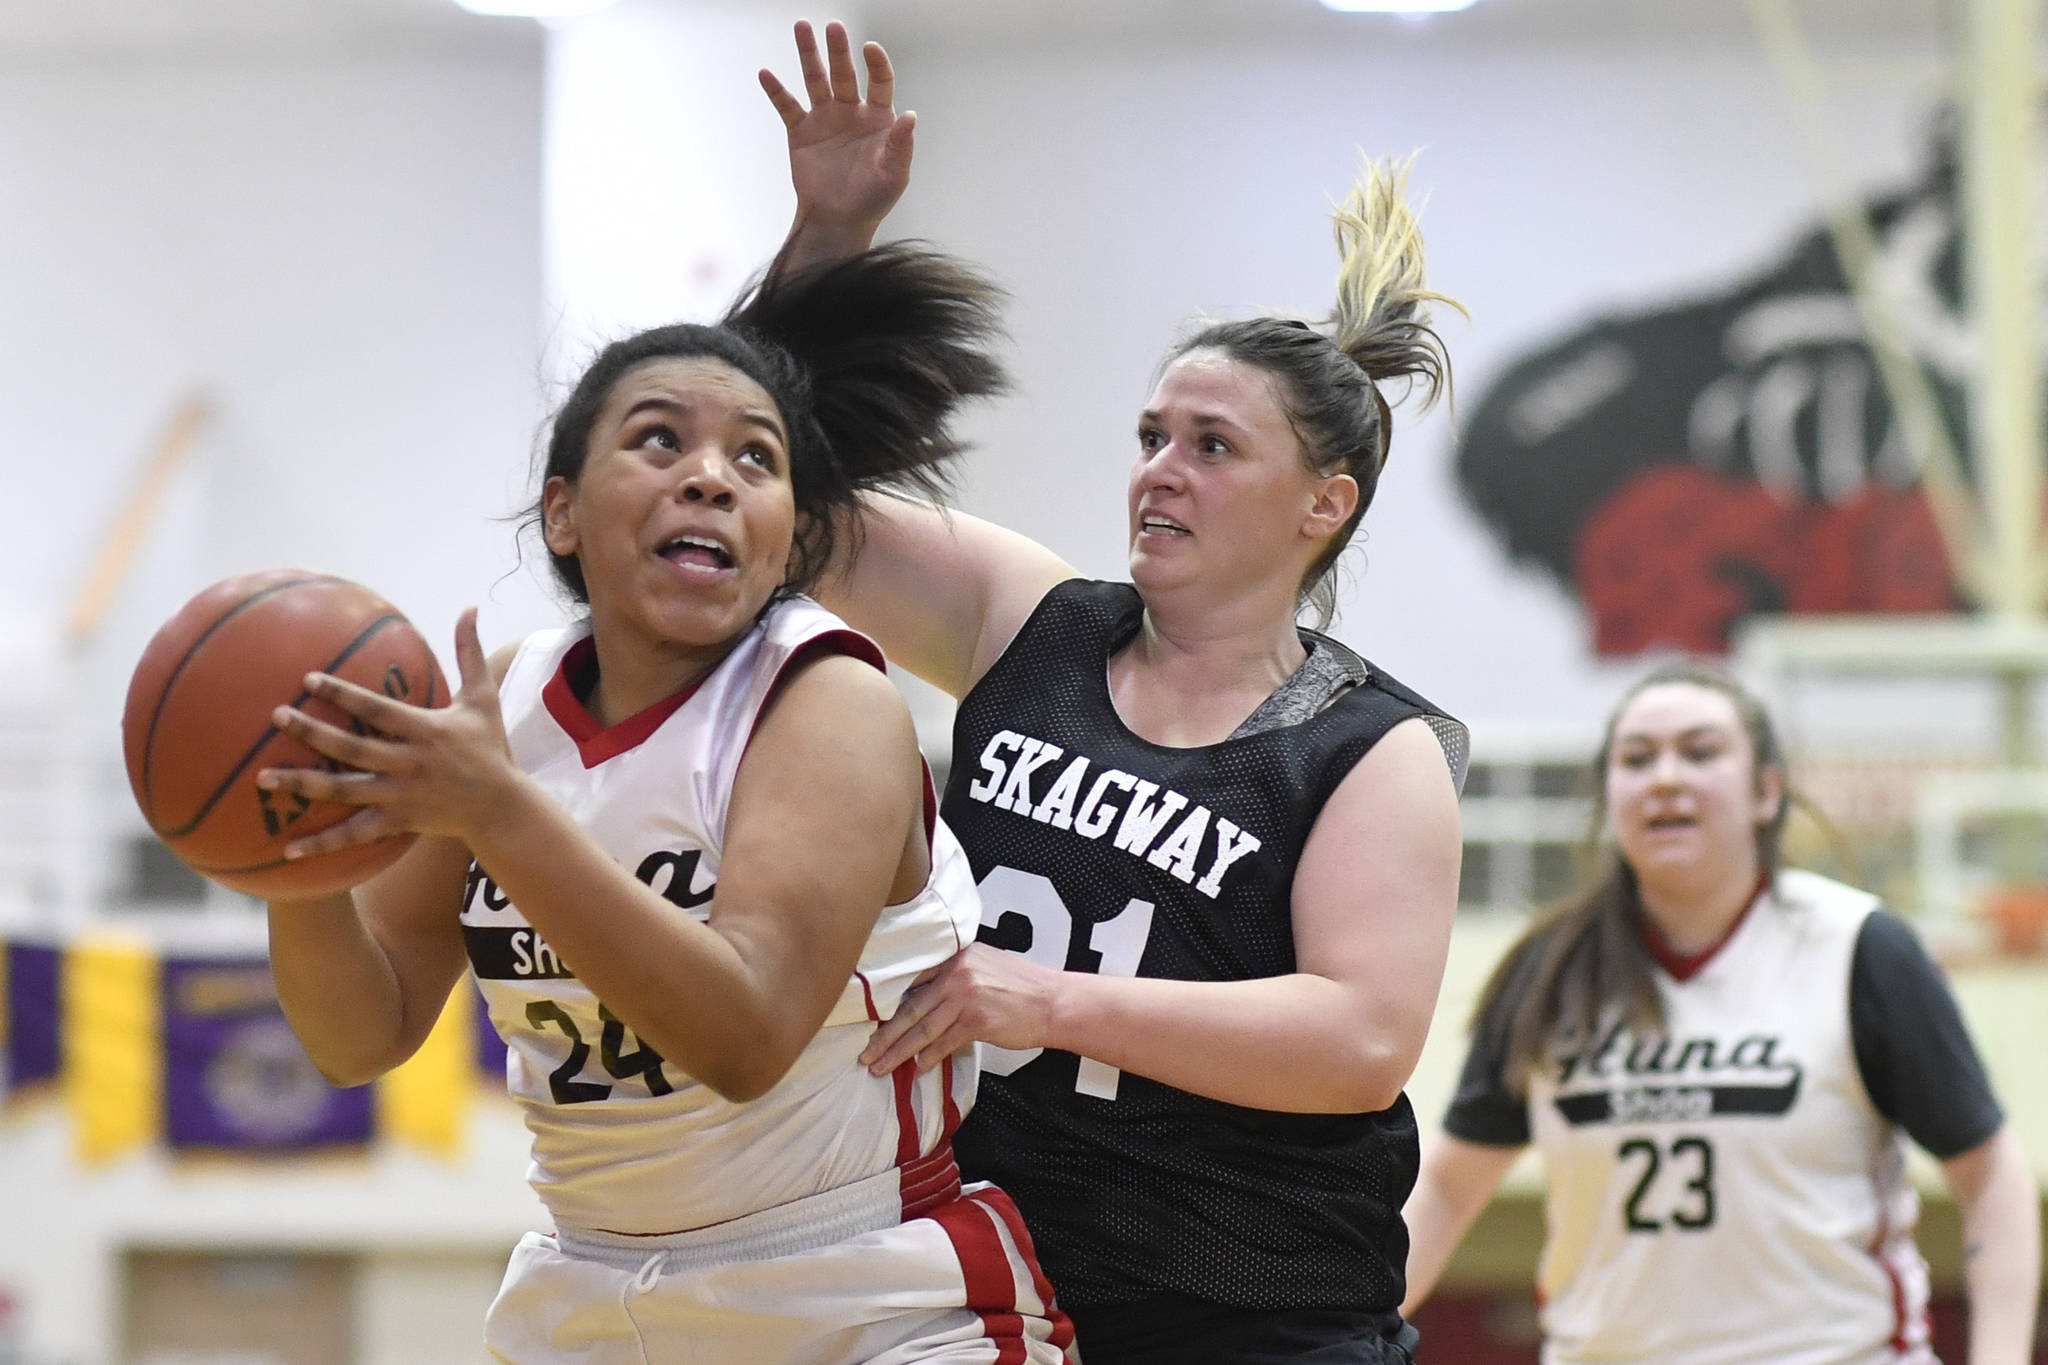 Hoonah’s Zhane White, left, is guarded closely by Skagway’s Tiffanie Ames at the Juneau Lions Club 73rd Annual Gold Medal Basketball Tournament at Juneau-Douglas High School: Yadaa.at Kalé on Tuesday, March 19, 2019. Skagway won 80-42. (Michael Penn | Juneau Empire)